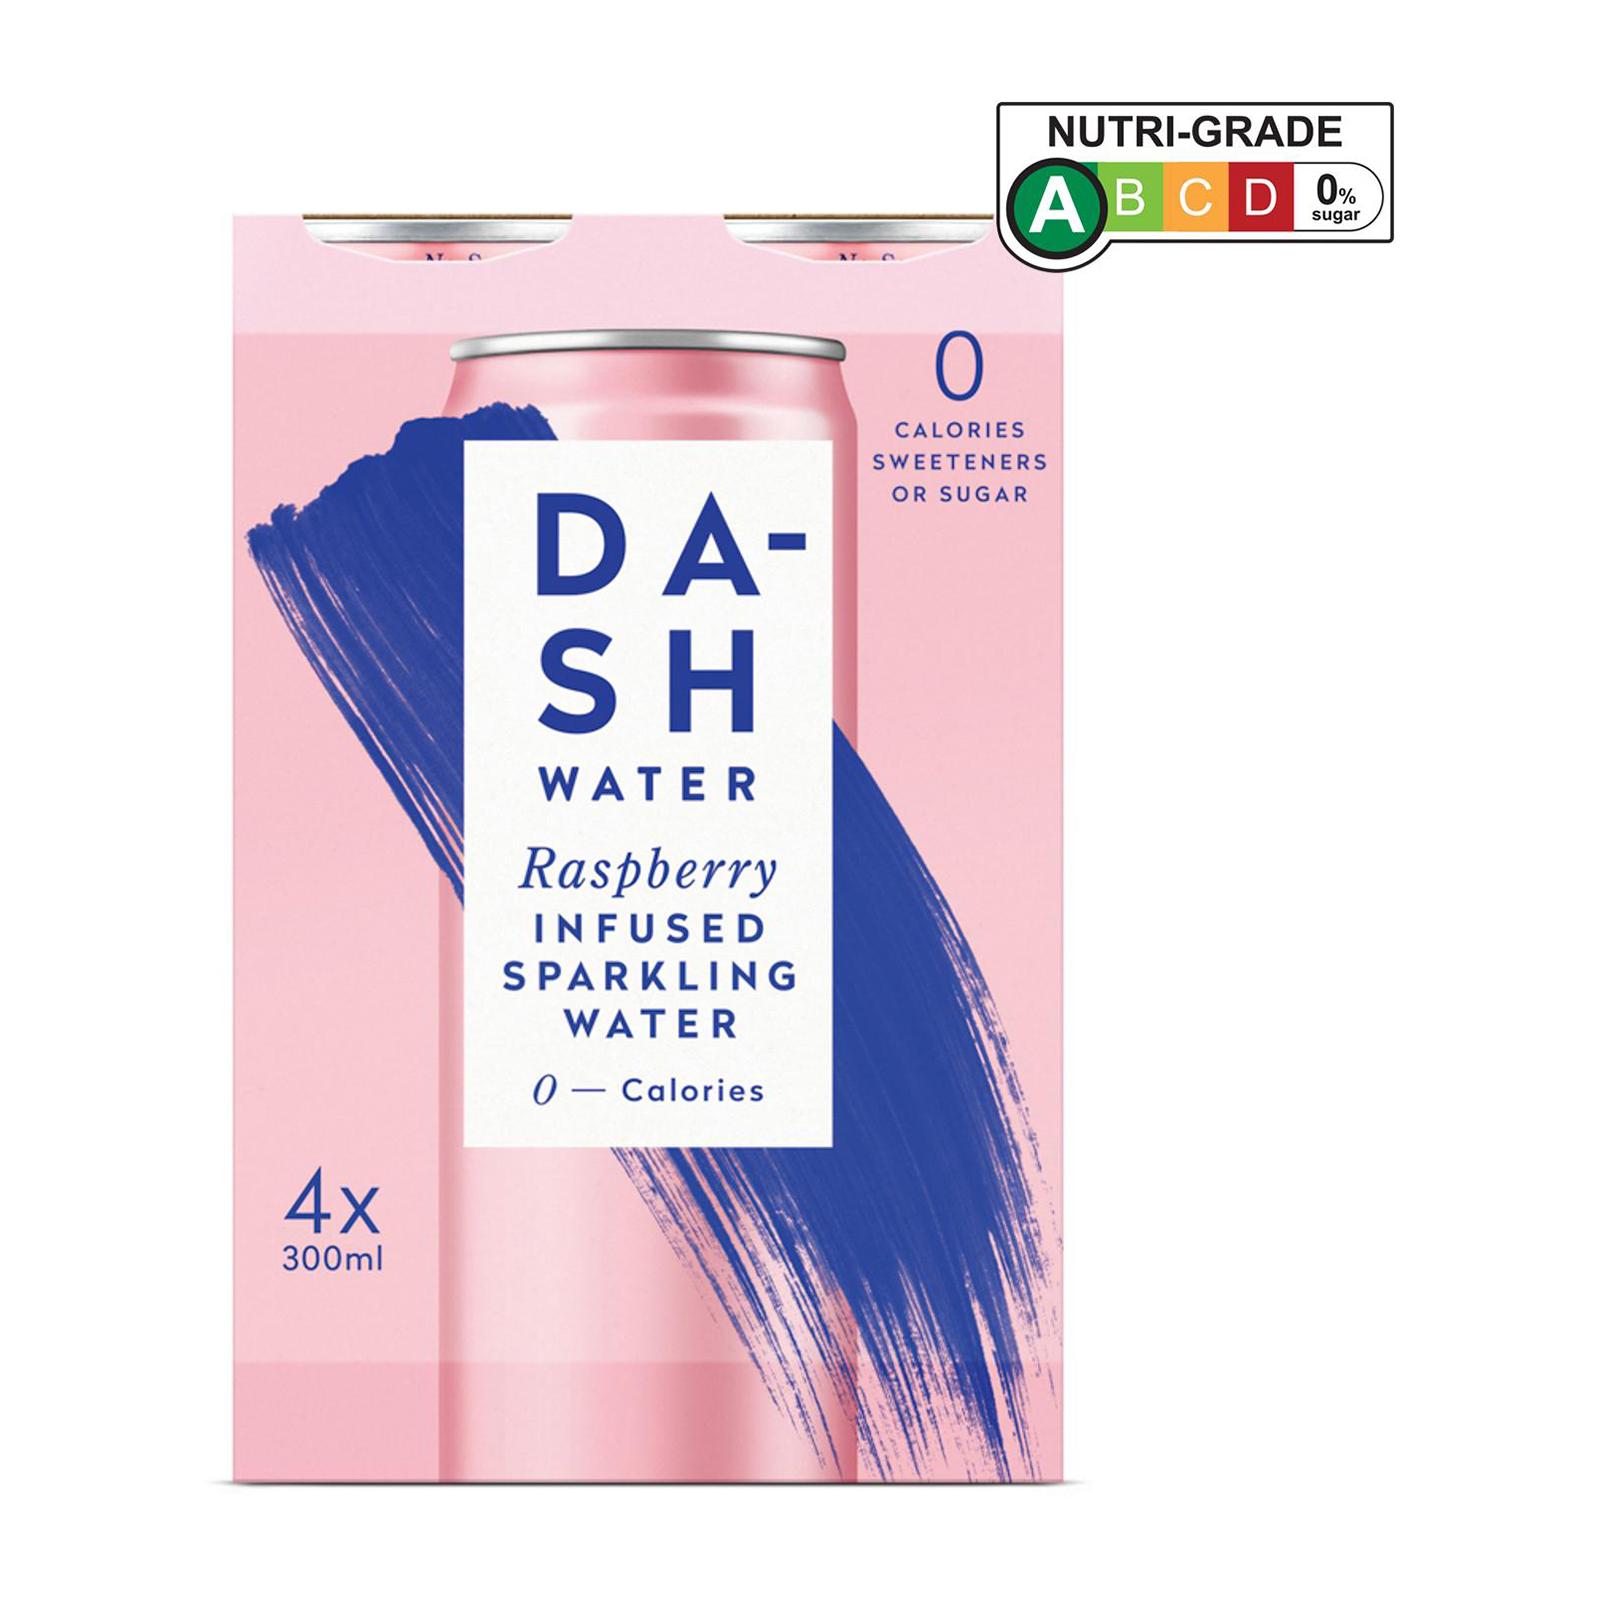 Dash Water Raspberry Infused Sparkling Water Multipack - 4 x 300ML